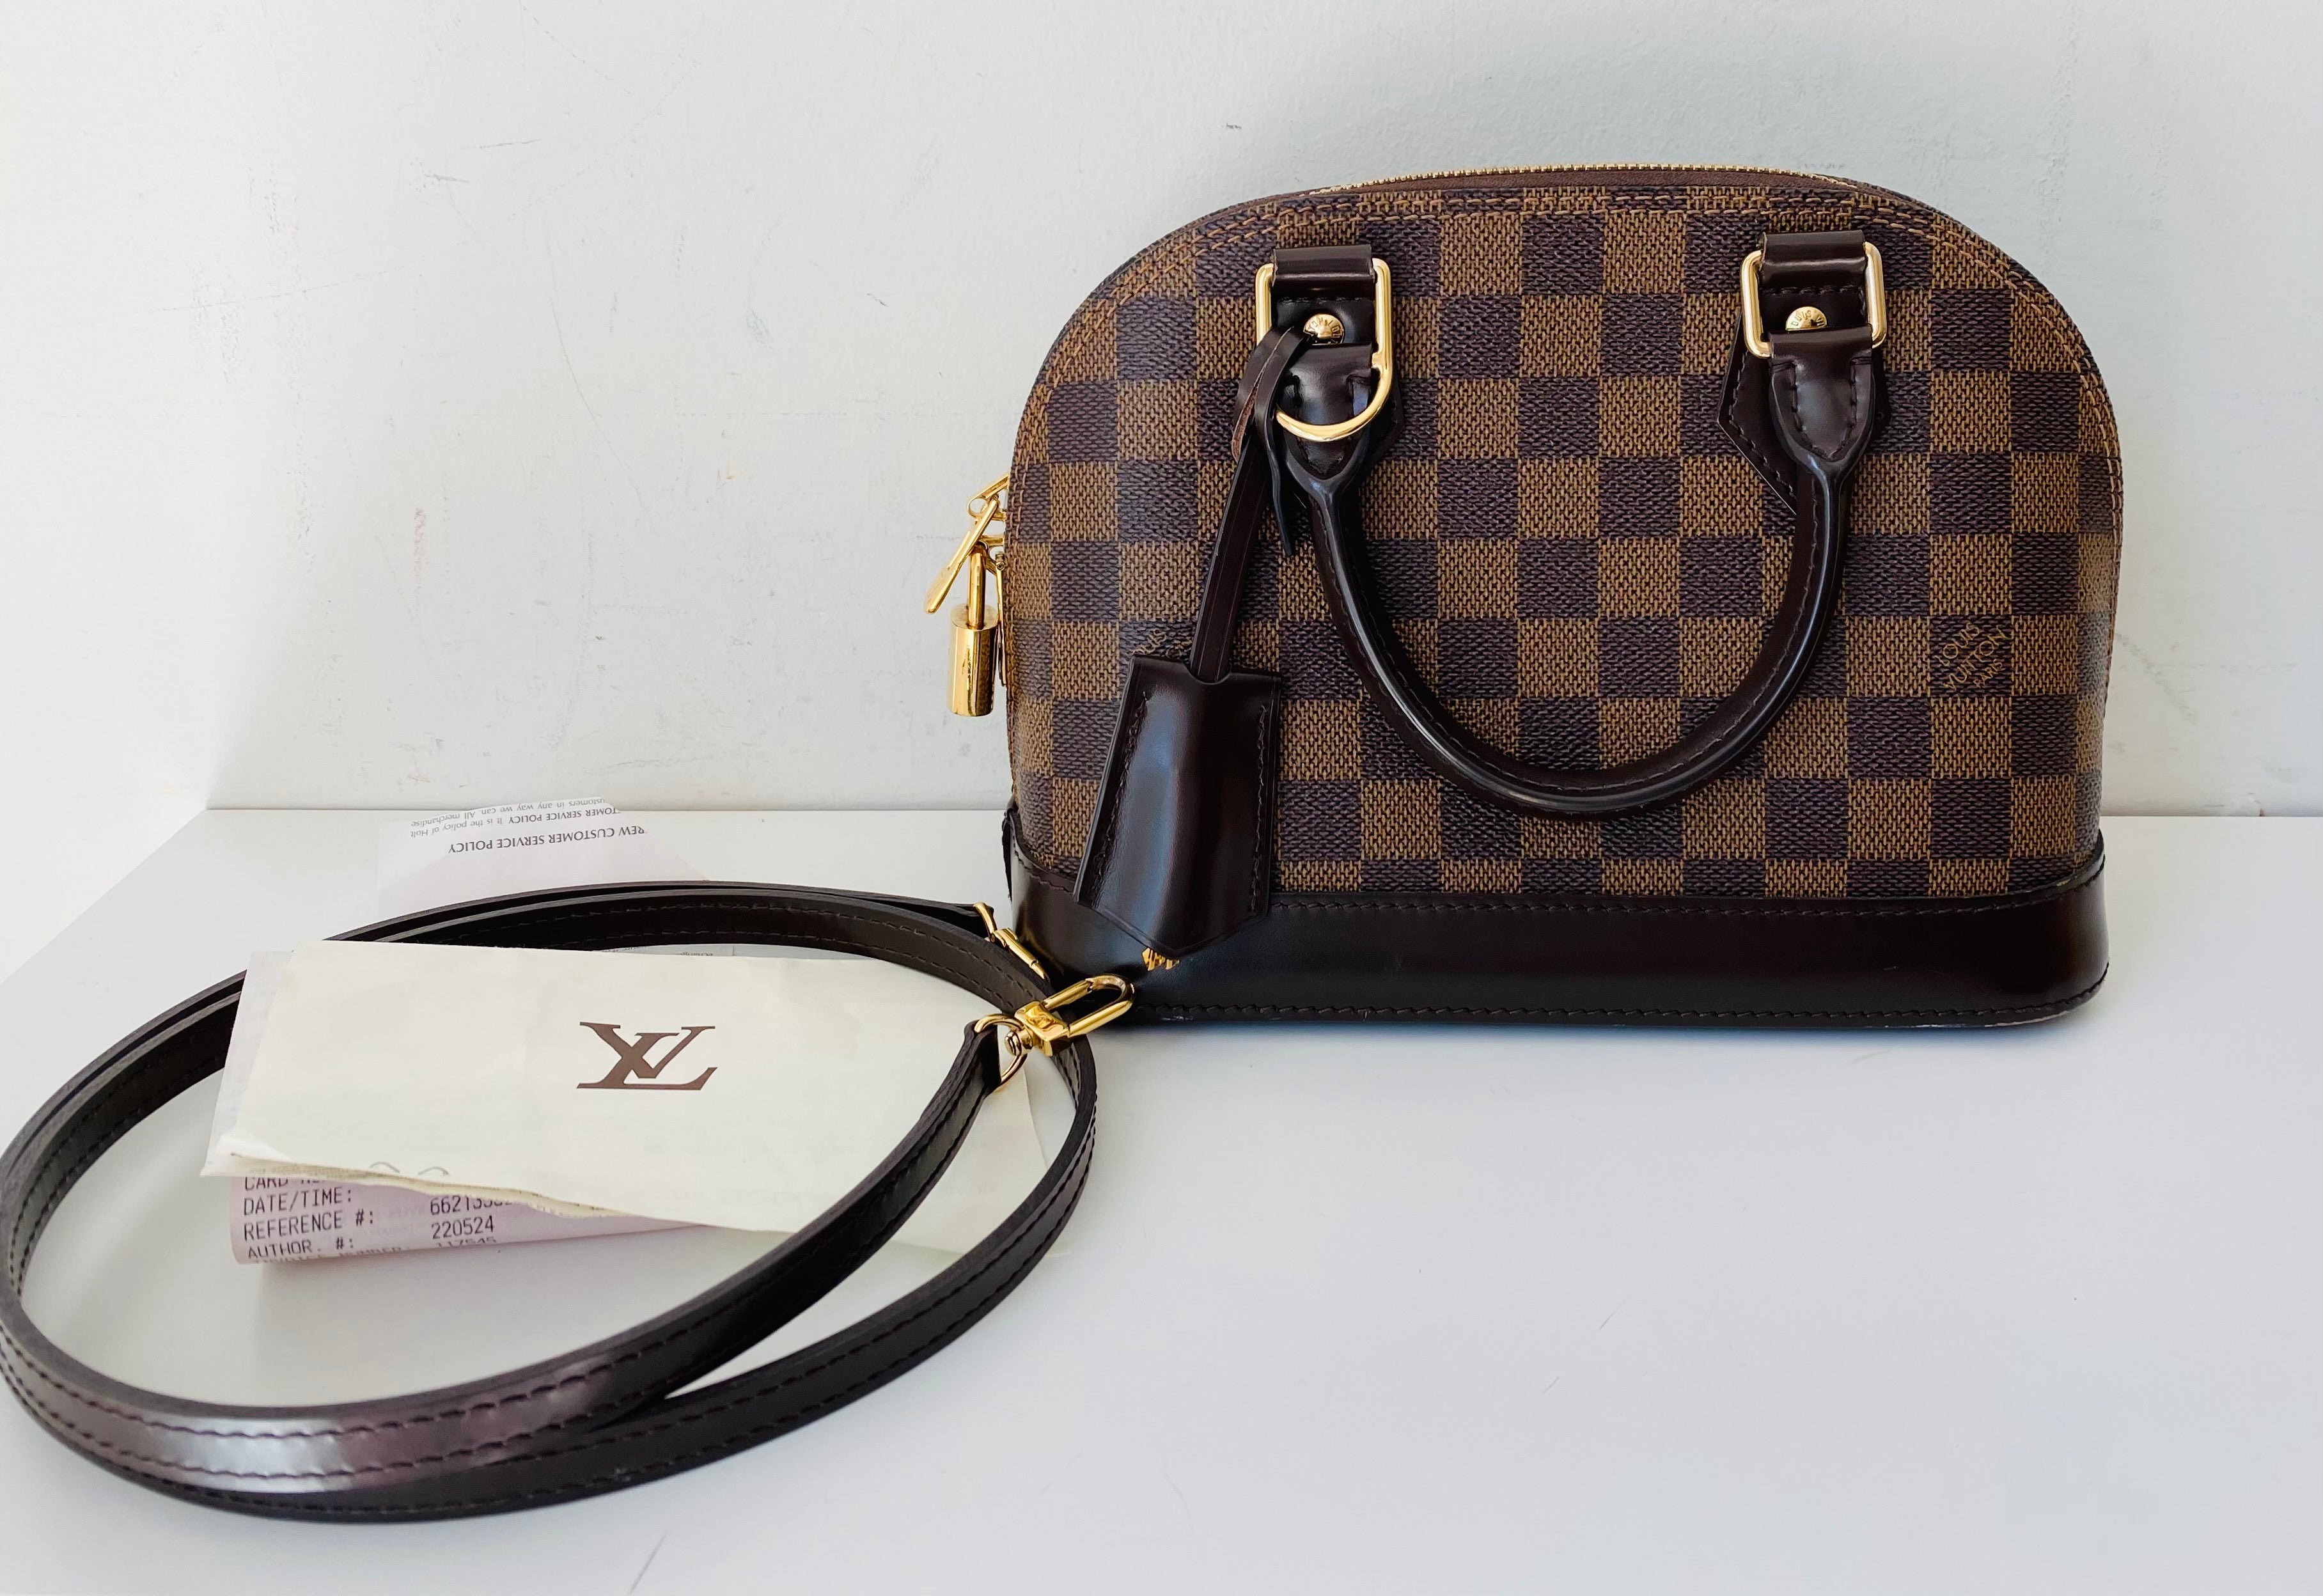 Louis Vuitton - Authenticated Alma Bb Handbag - Leather Red for Women, Good Condition